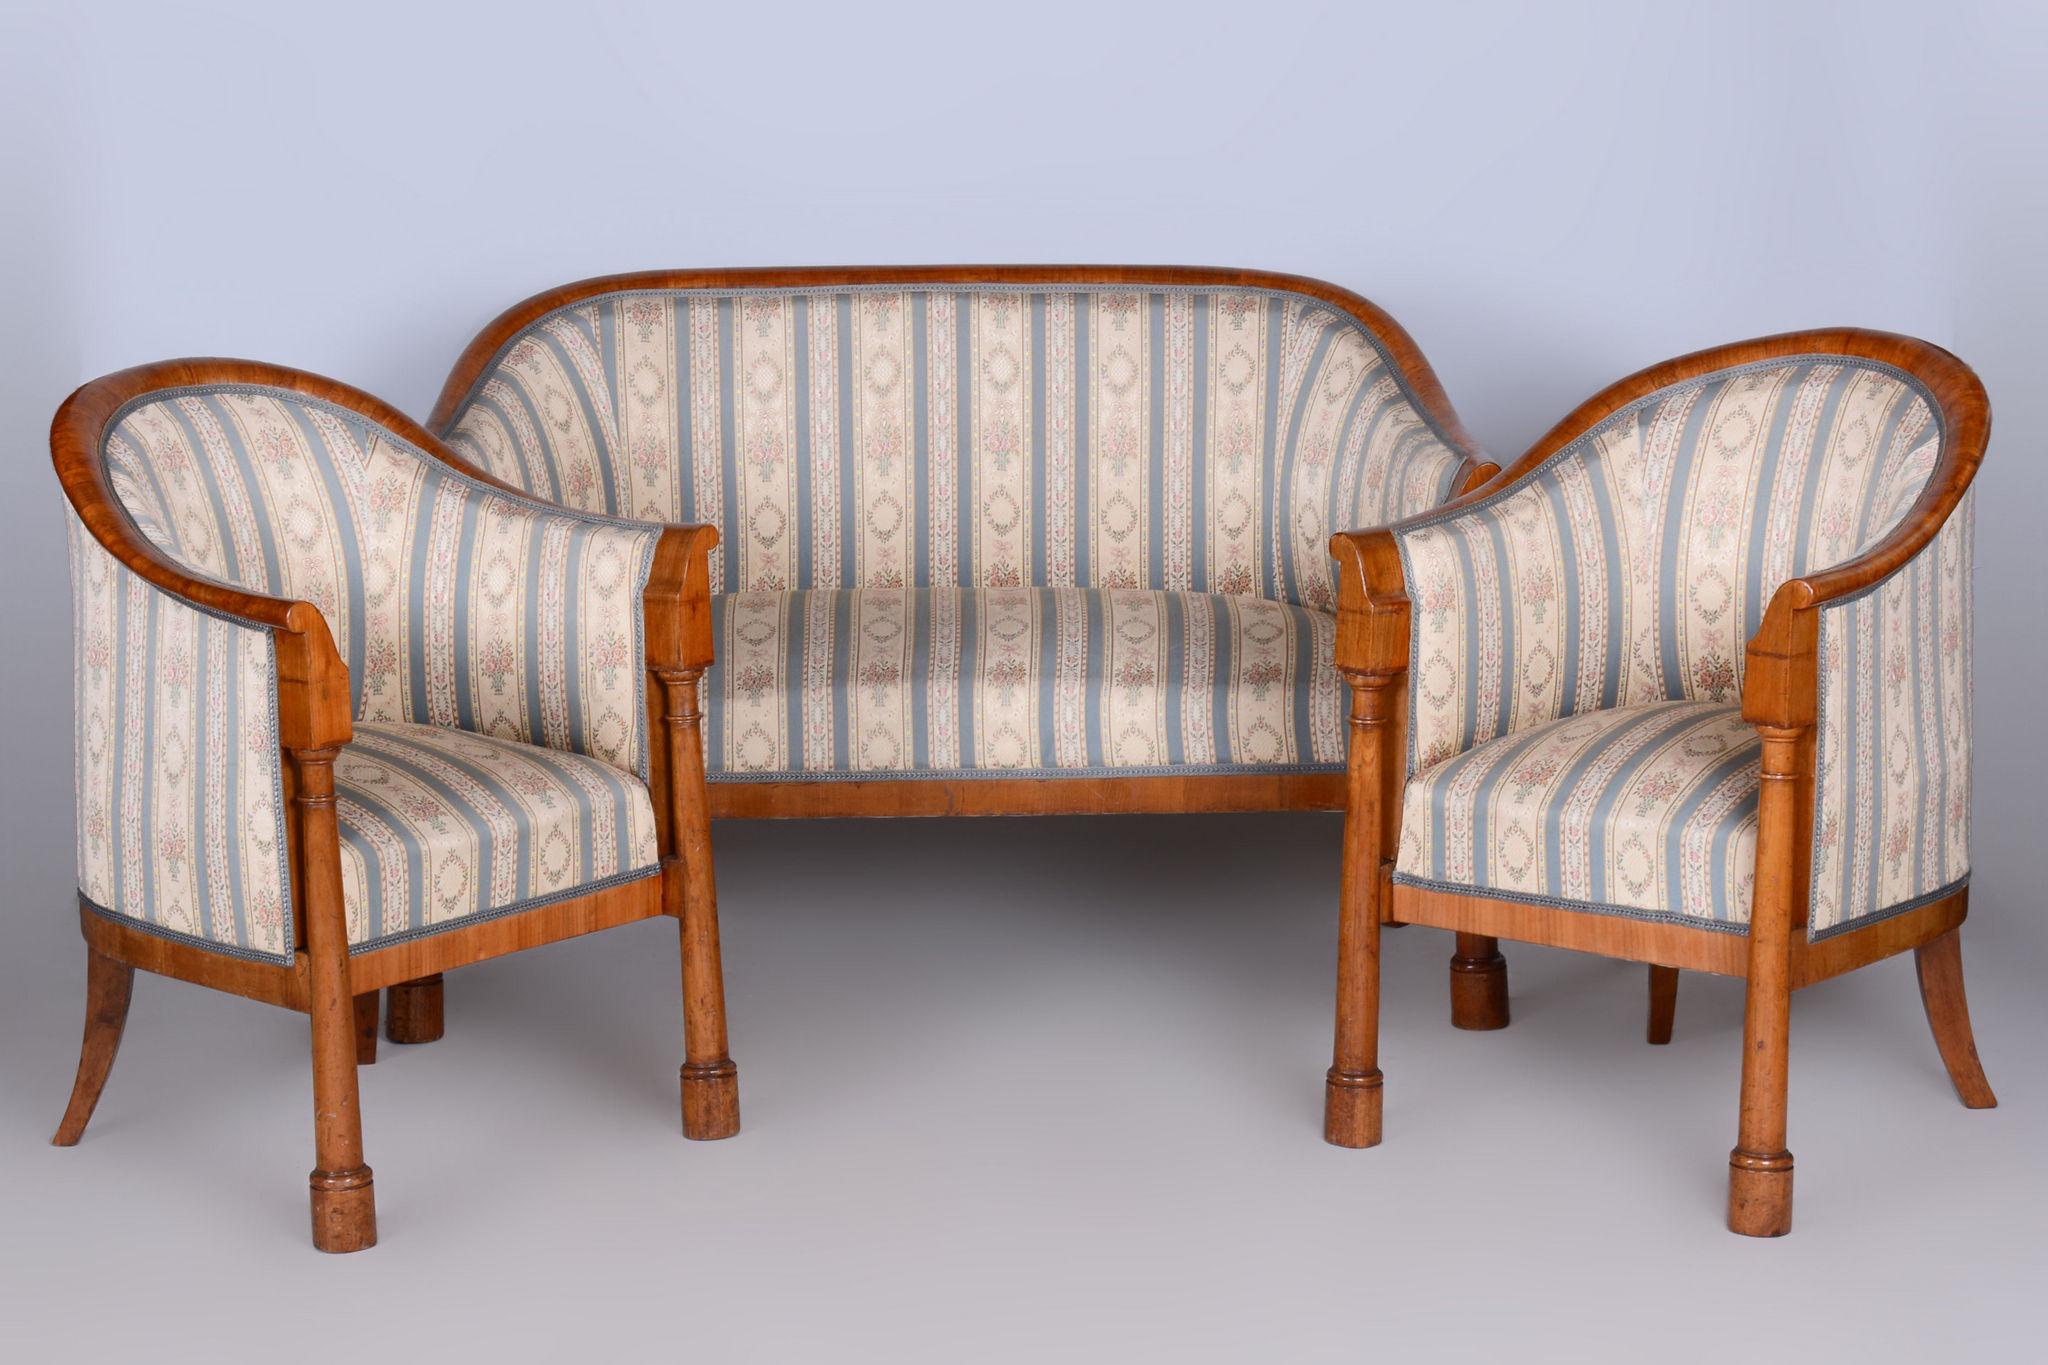 Restored Biedermeier Birch Seating Set of Sofa and Two Chairs. 

Source: Vienna, Austria
Period: 1830-1839
Material: Birch

Revived polish.
Preserved unseated original upholstery.
Professionally cleaned original fabric.

Sofa dimensions:
Height: